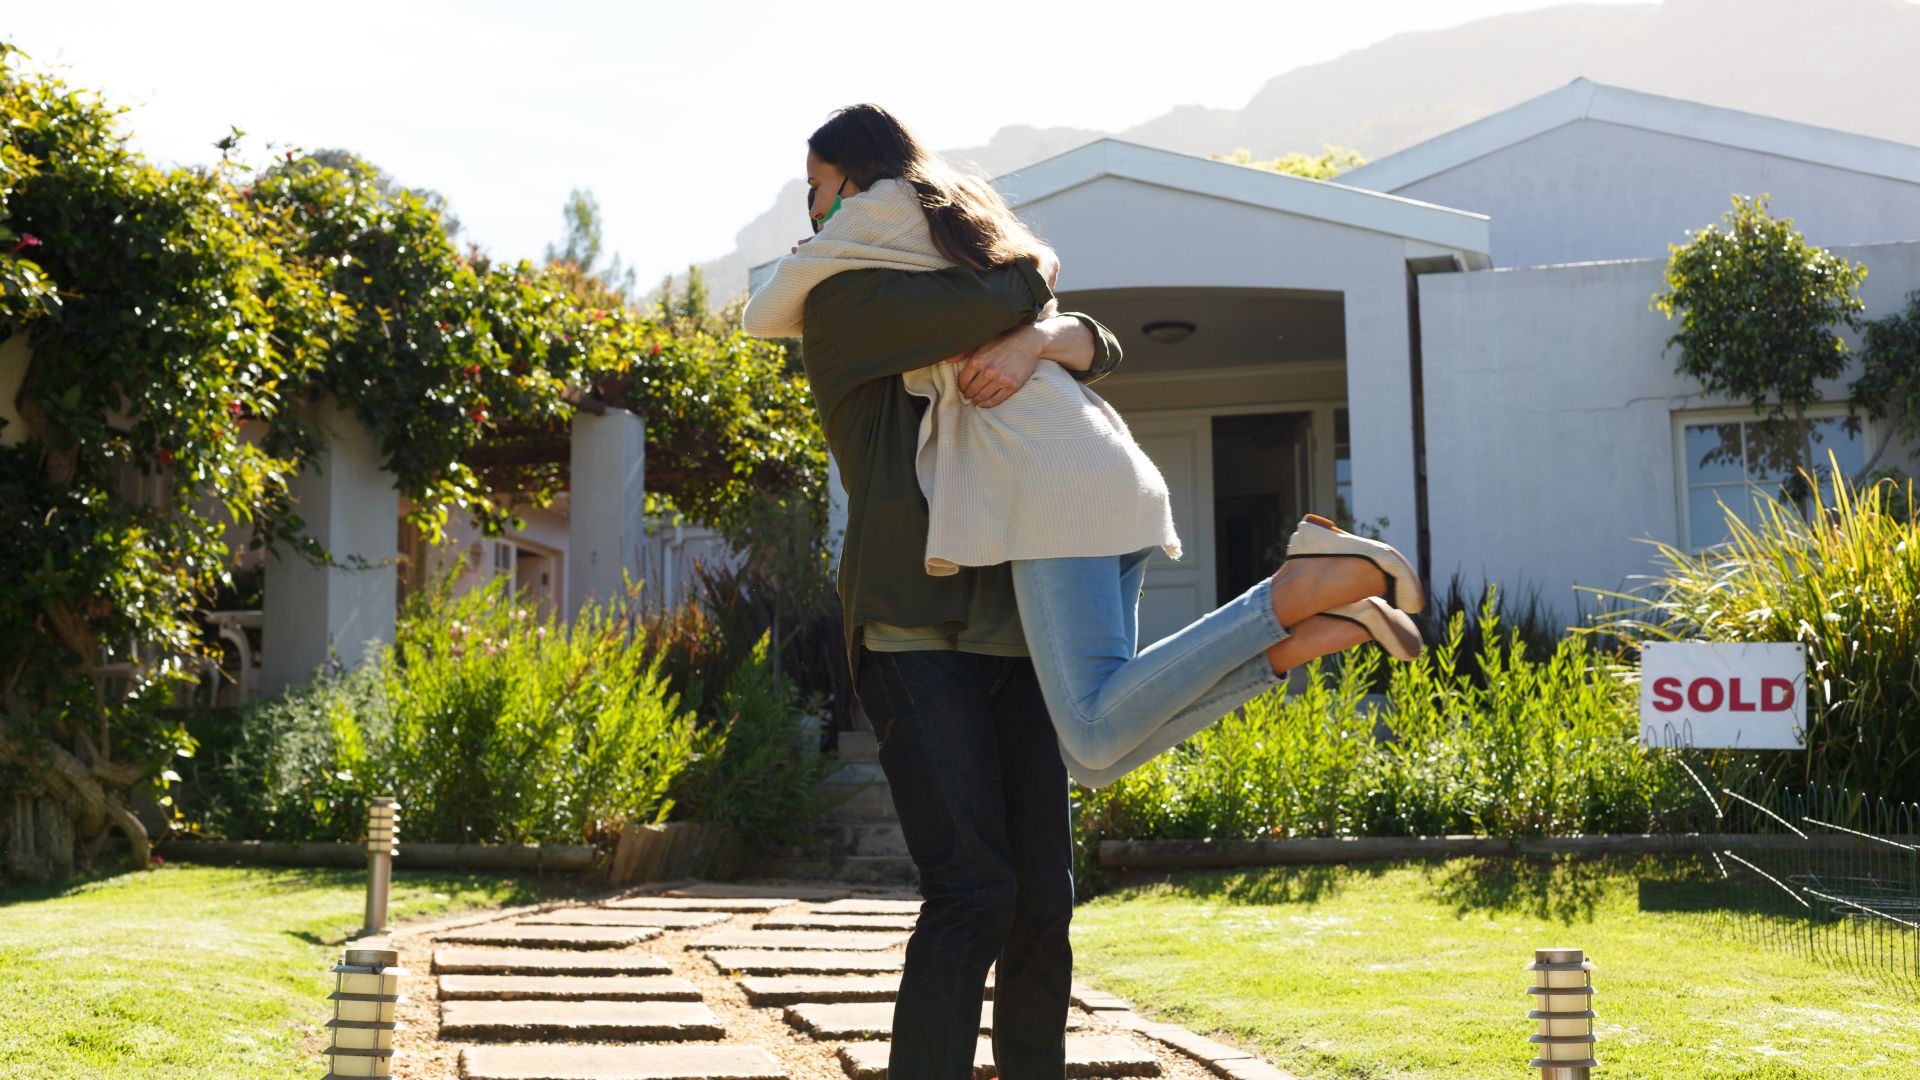 A couple celebrating in front of a house